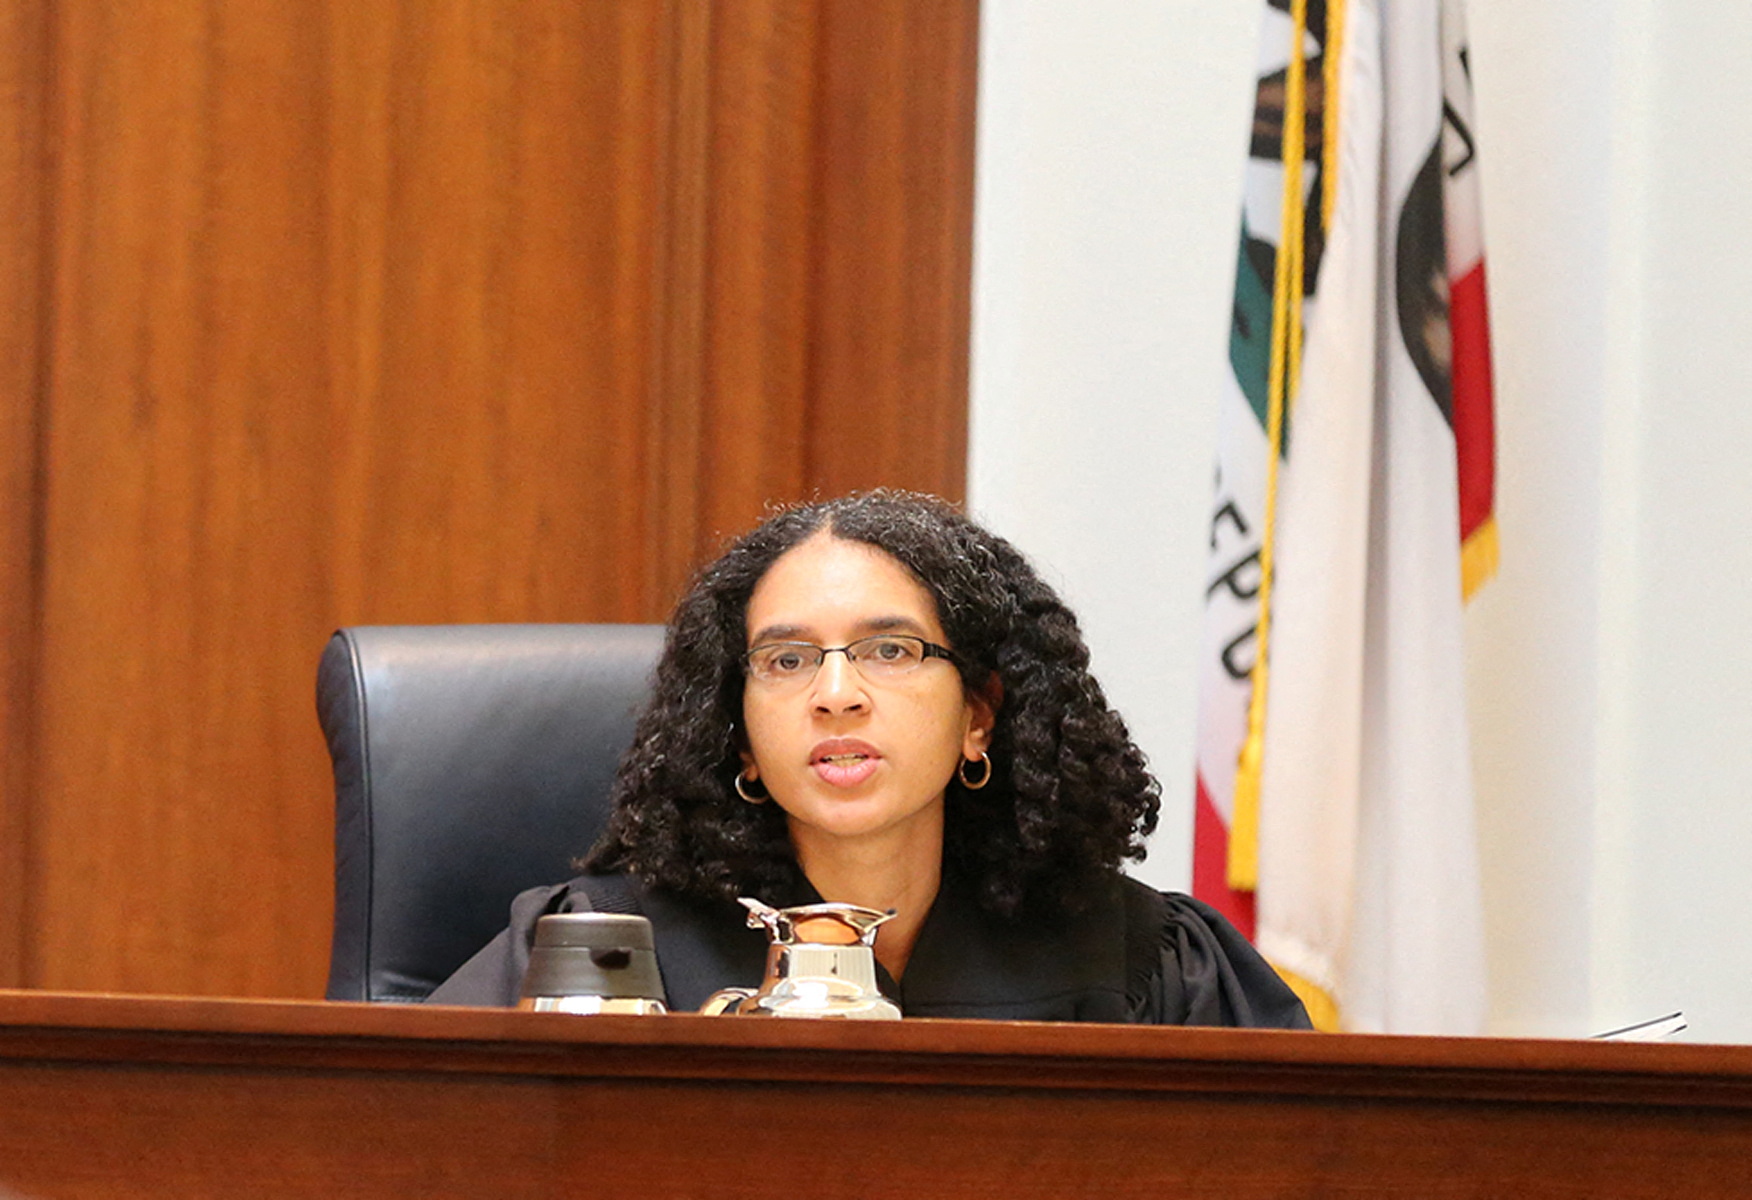 California Supreme Court Justice Leondra Kruger is seen in an undated photo